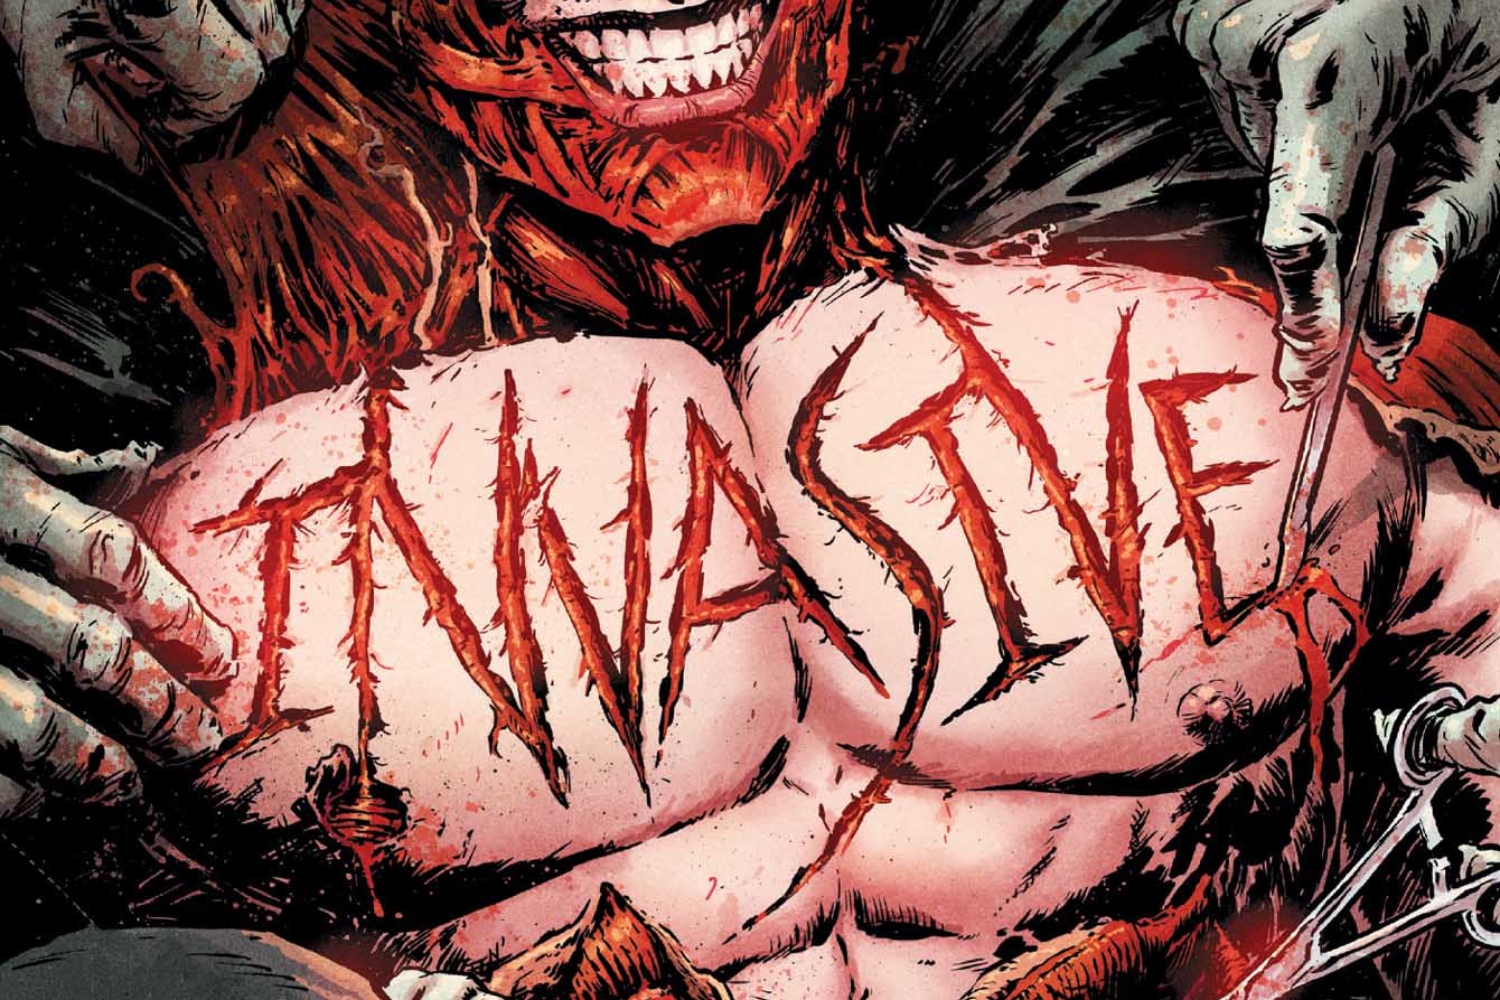 Cullen Bunn excises the gory truth behind 'Invasive'